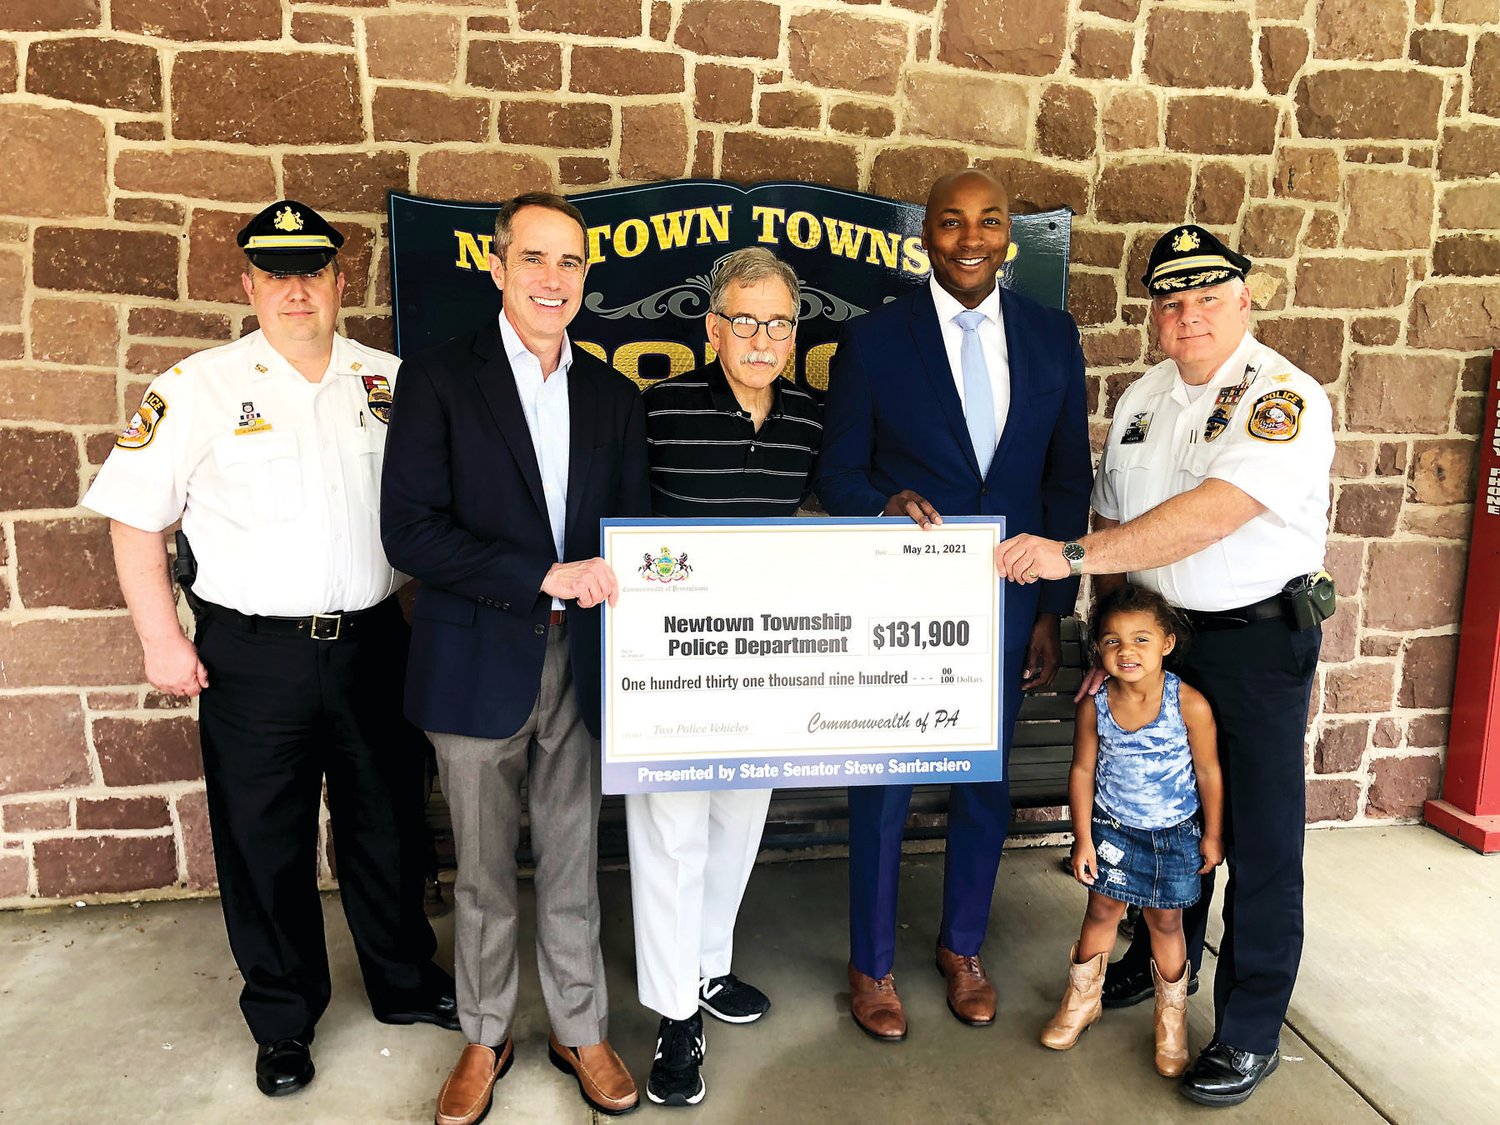 Members of the Newtown Township Police Department and Supervisor David Oxley receive a check from Sen. Santarsiero.